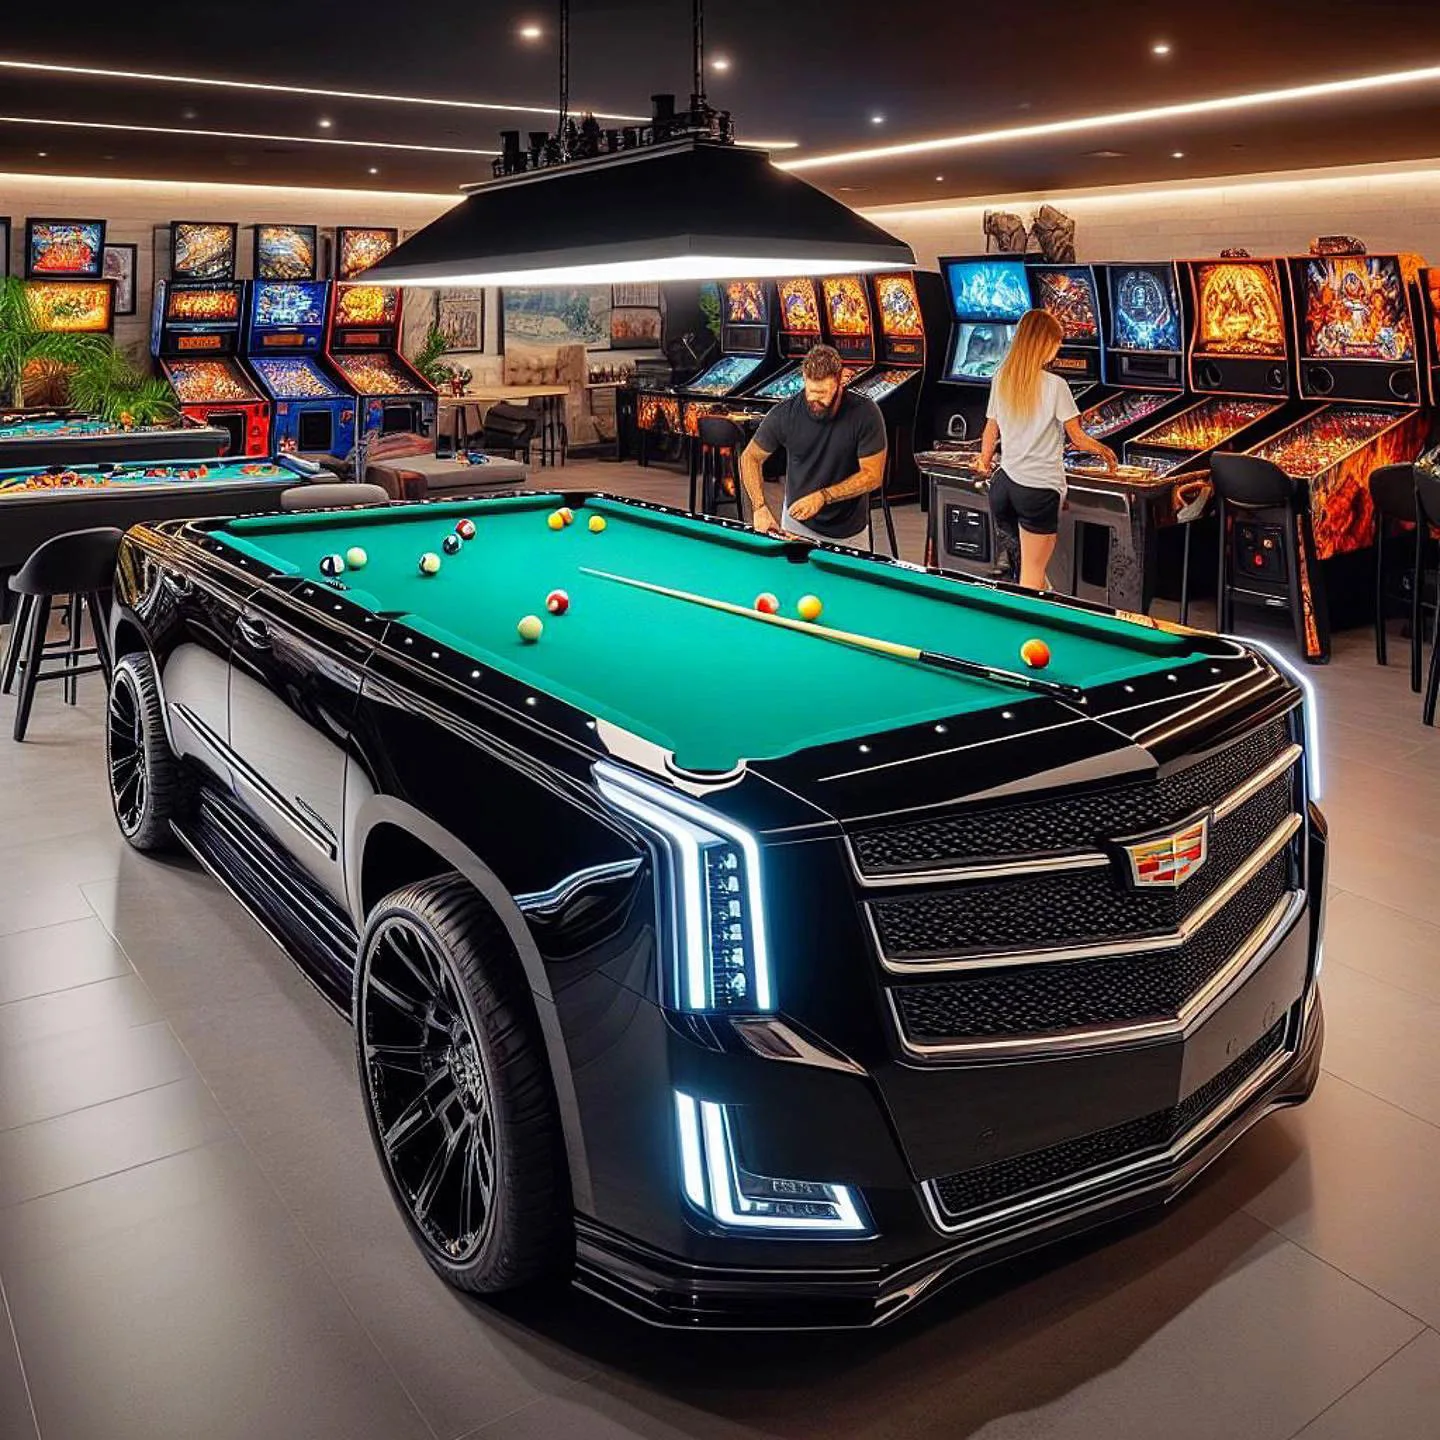 GMC Inspired Pool Table: Luxury Fusion of Car Design